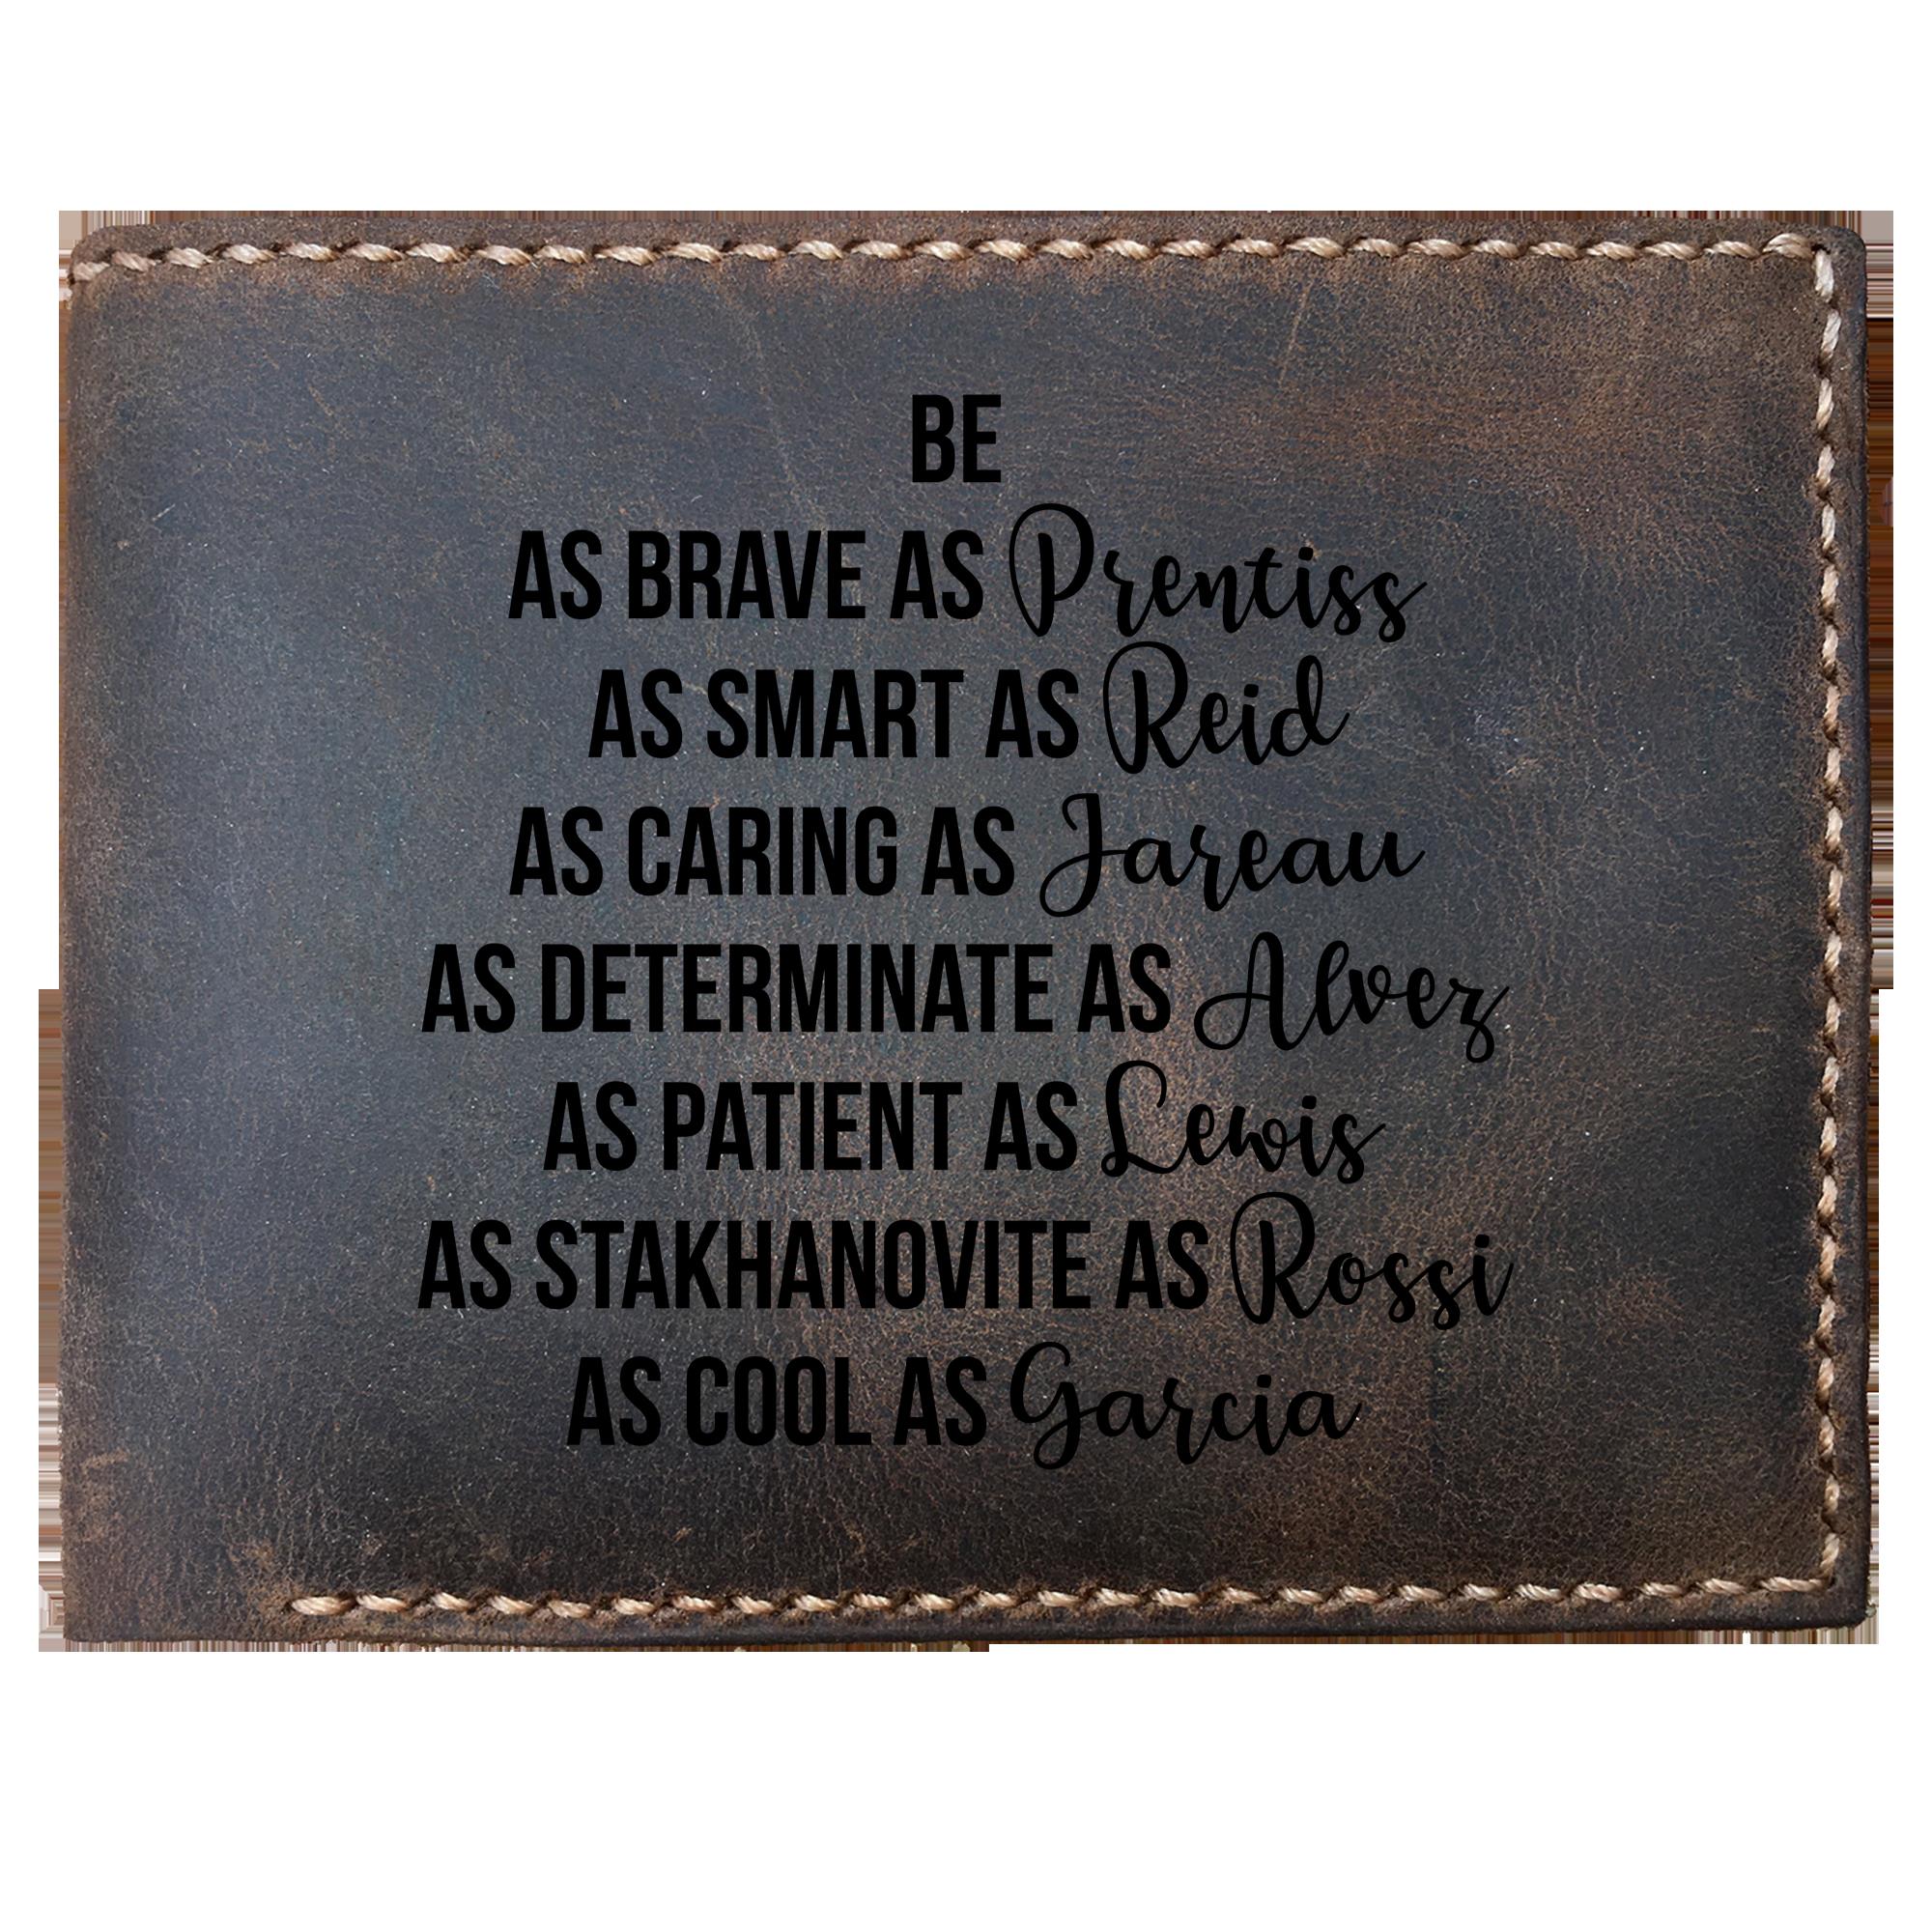 Skitongifts Funny Custom Laser Engraved Bifold Leather Wallet For Men, Brave As Prentiss,Smart As Reid,Caring As Jareau